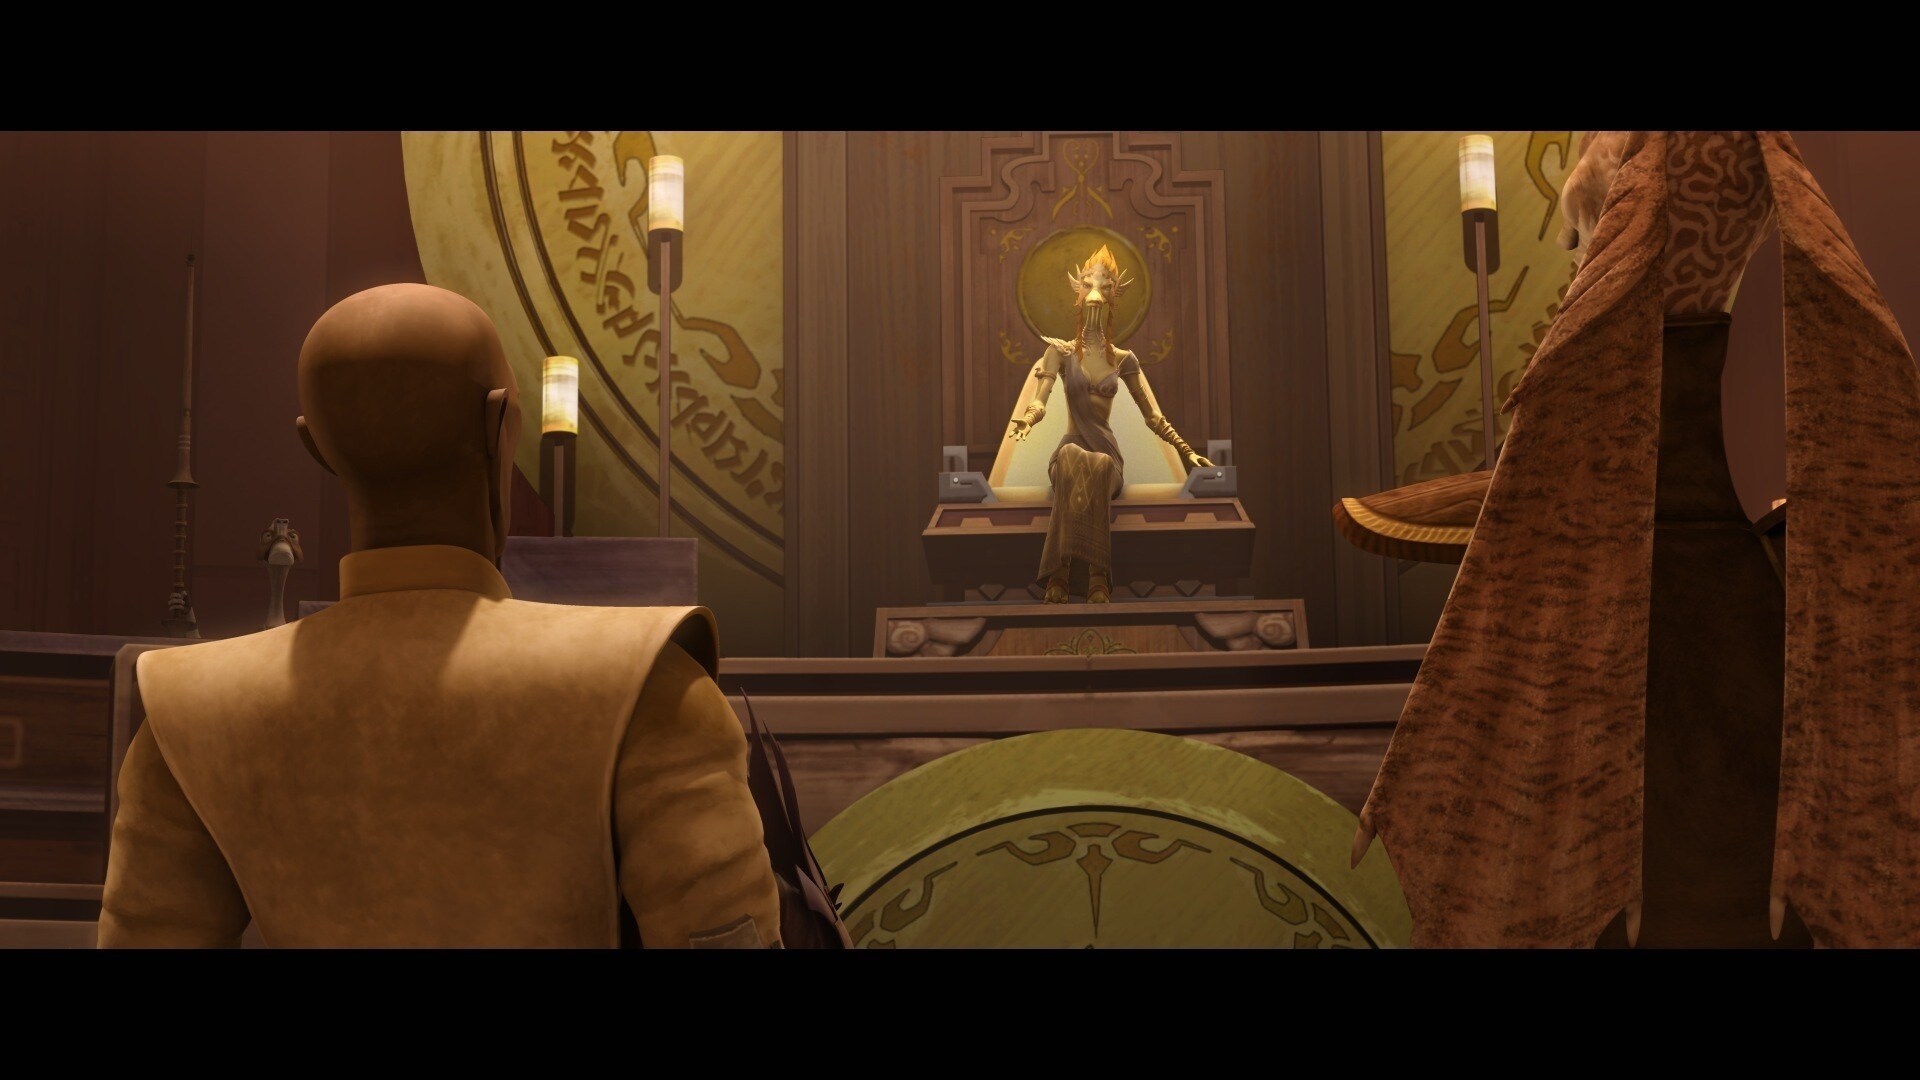 Julia accepts this, but asks for Mace to leave. The Jedi Master is escorted out the chamber, and ...